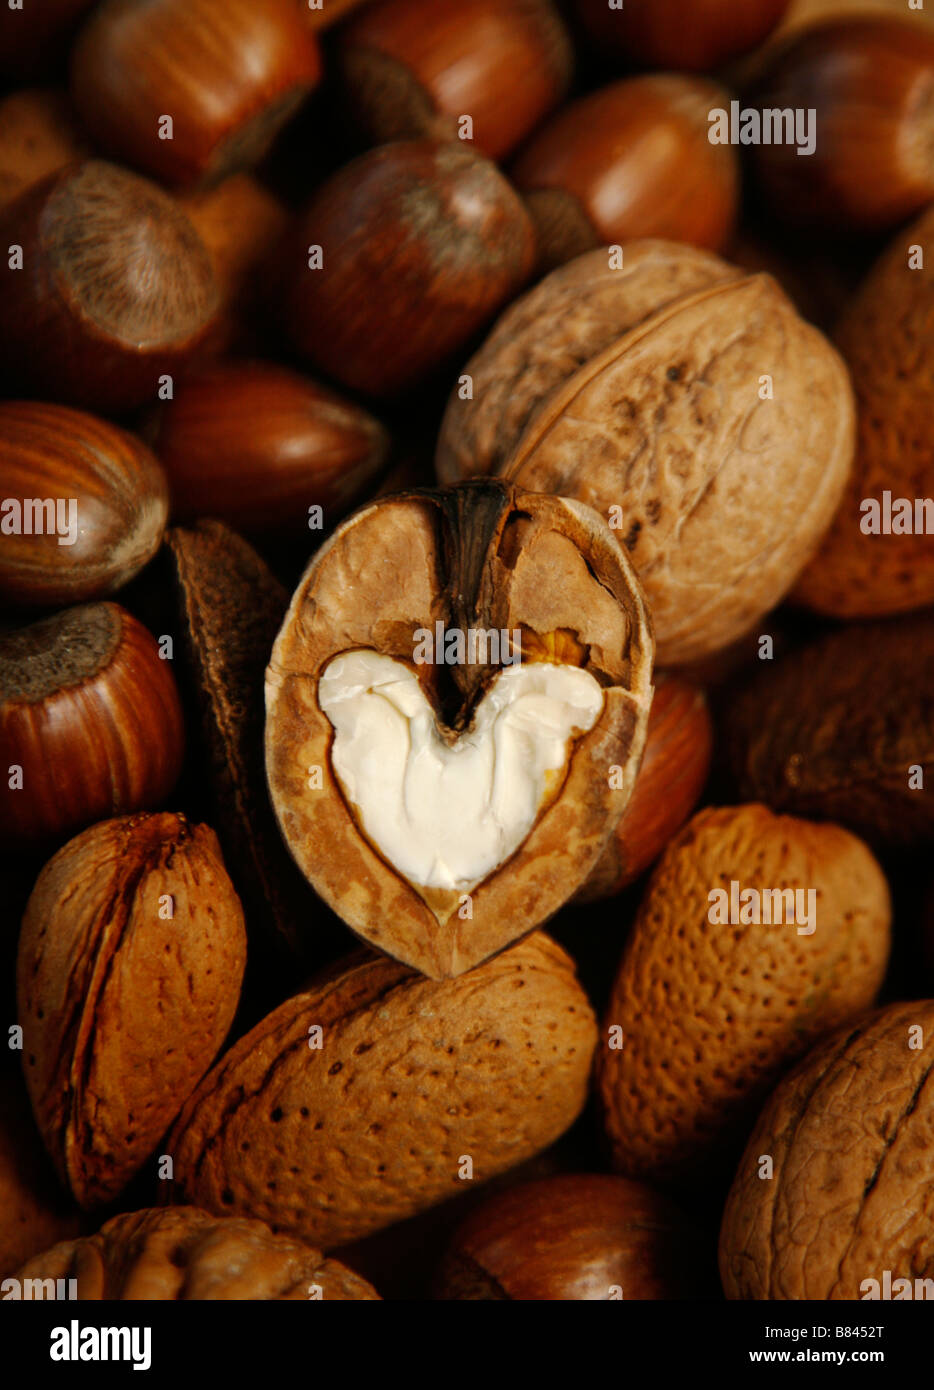 nutty love heart shaped nut kernel of a walnut surrounded by nuts Stock Photo